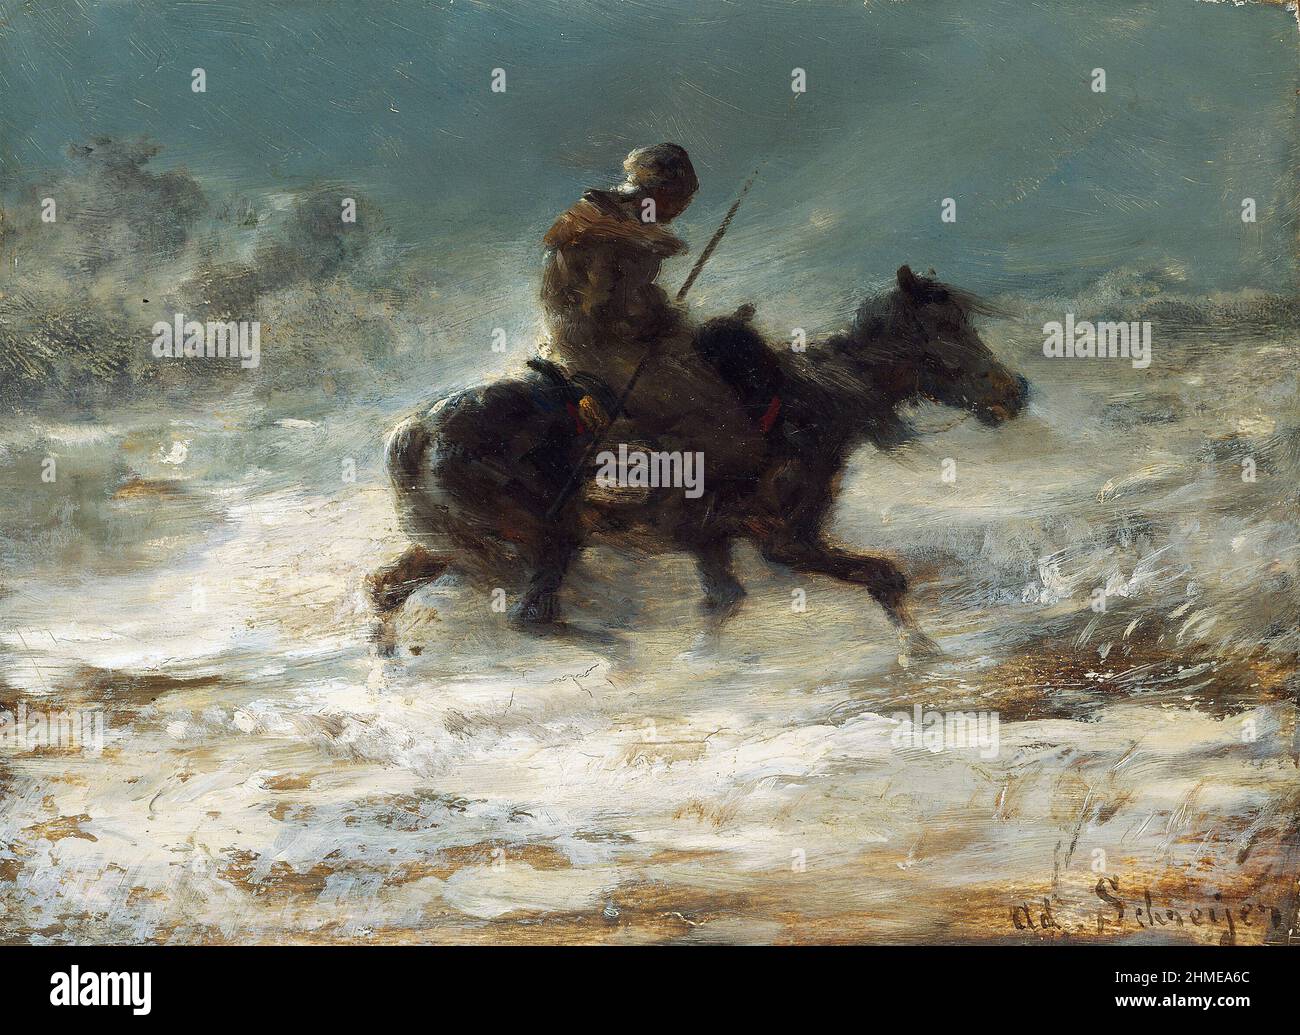 Man with Lance Riding through the Snow by Adolf Schreyer (1828-1899), oil on canvas, 1863 Stock Photo